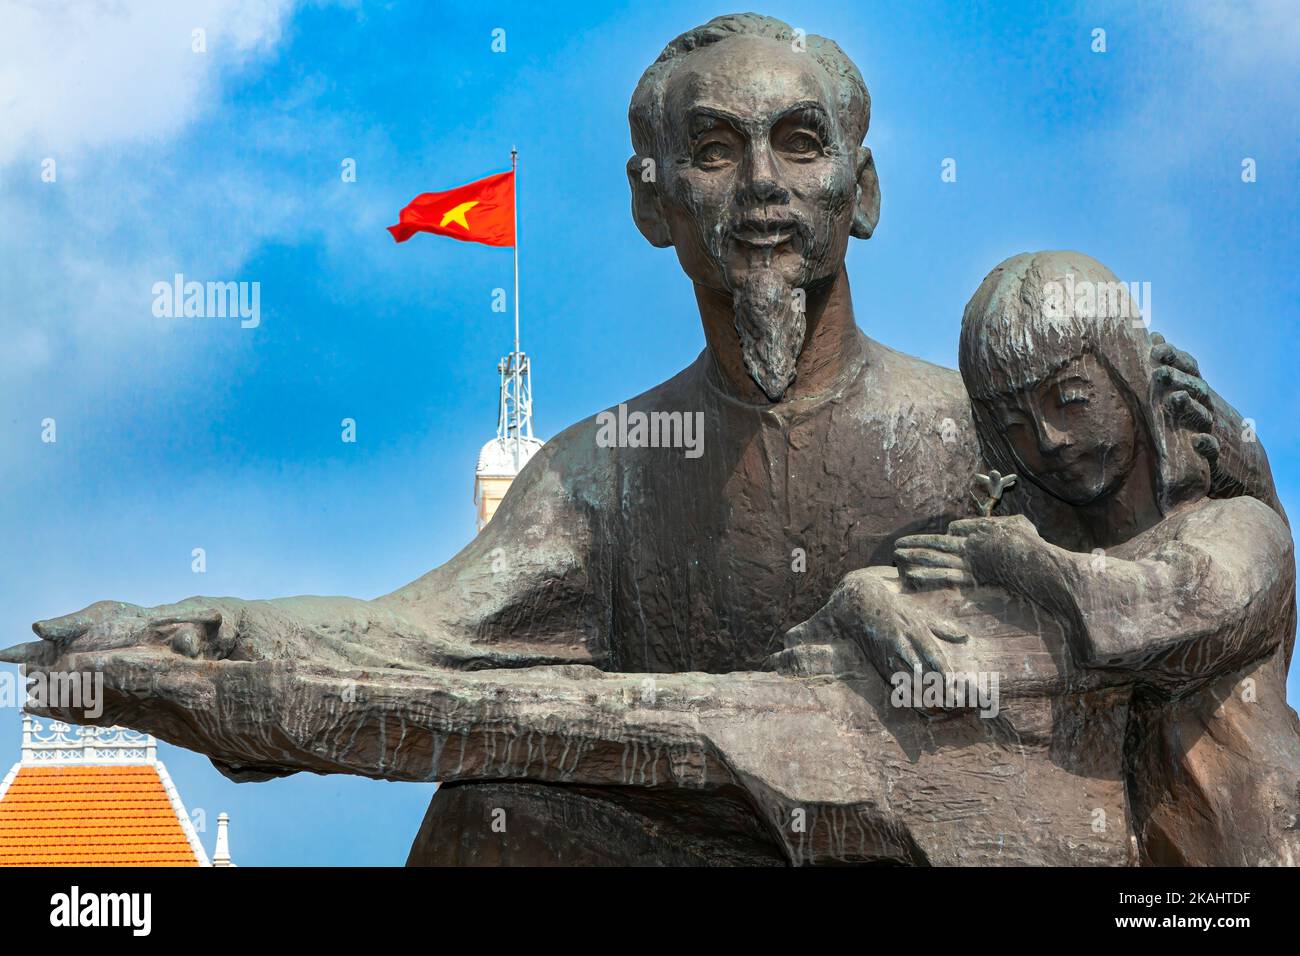 Ho Chi Minh statue and People's Committee Building, City Hall, central Saigon, Vietnam Stock Photo